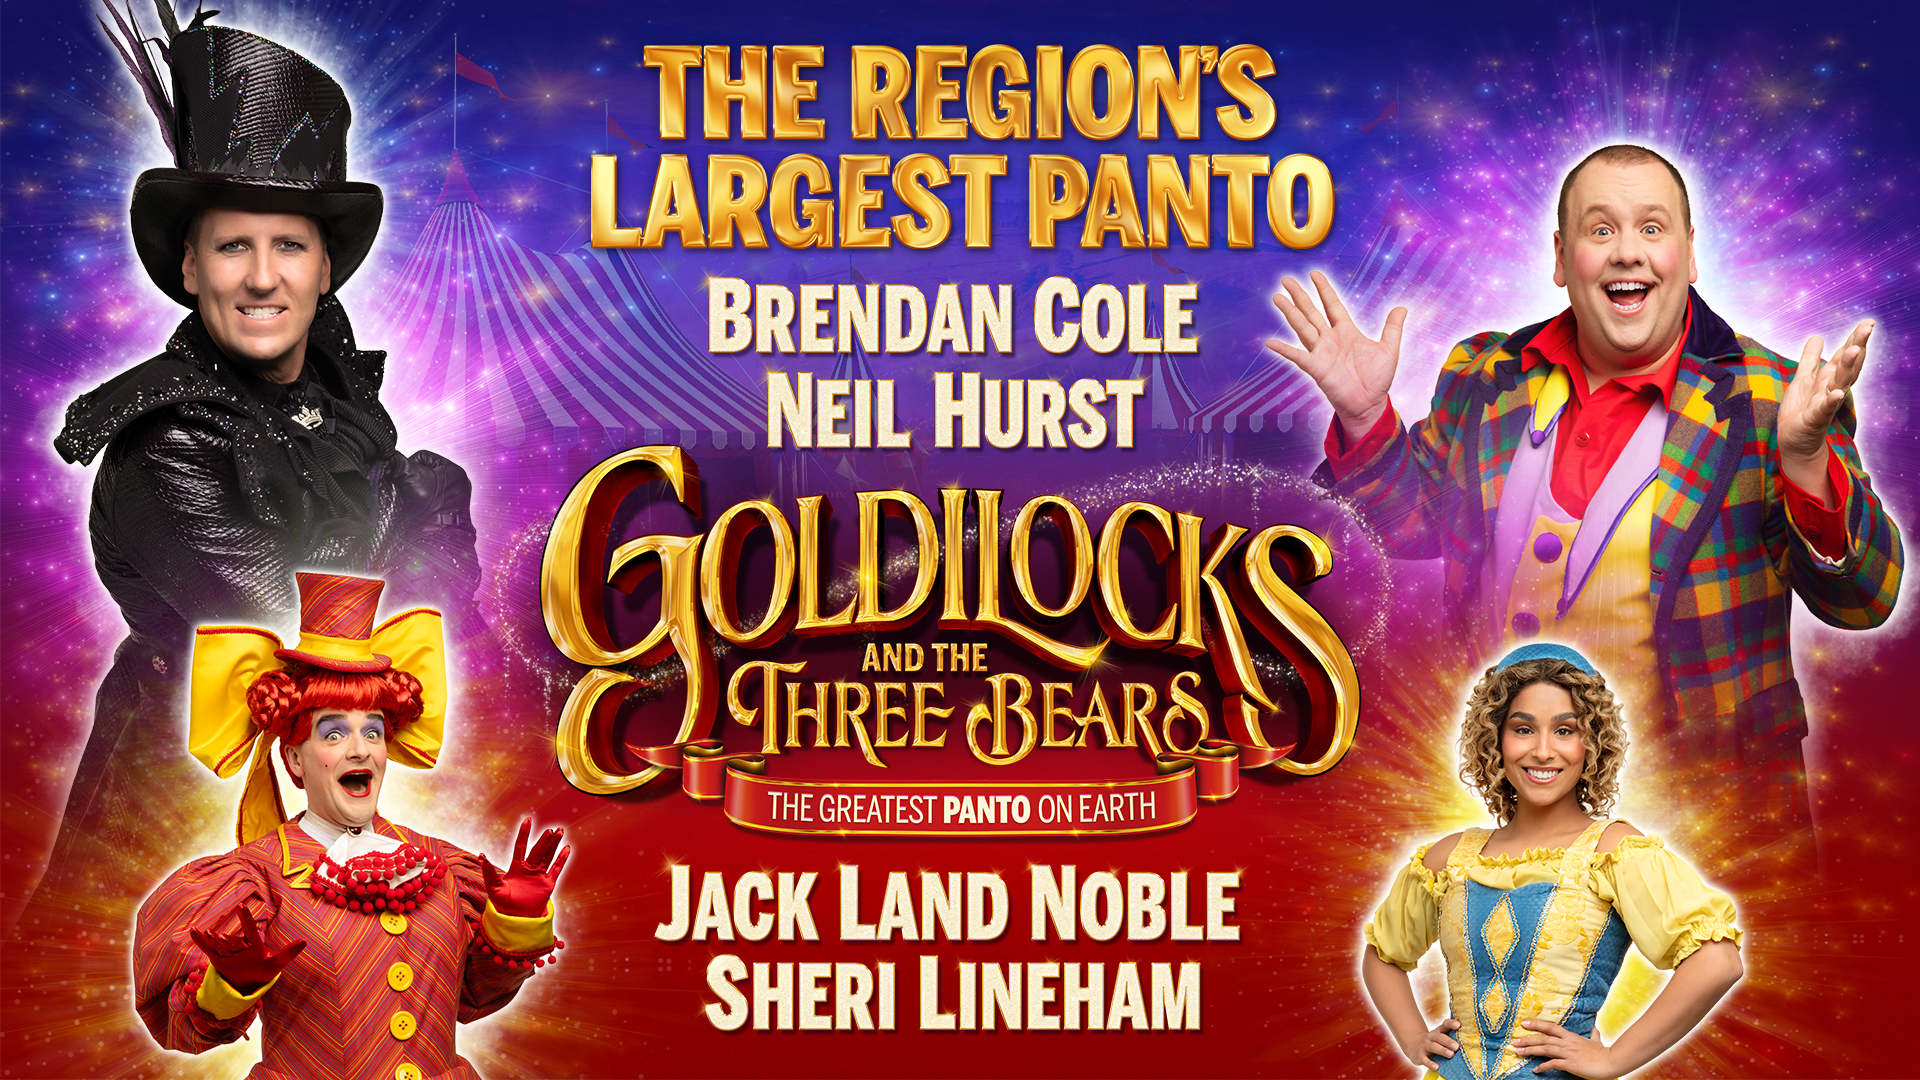 The words Goldilocks and the three bears in the centre in gold against a blue background with red and white tents behind